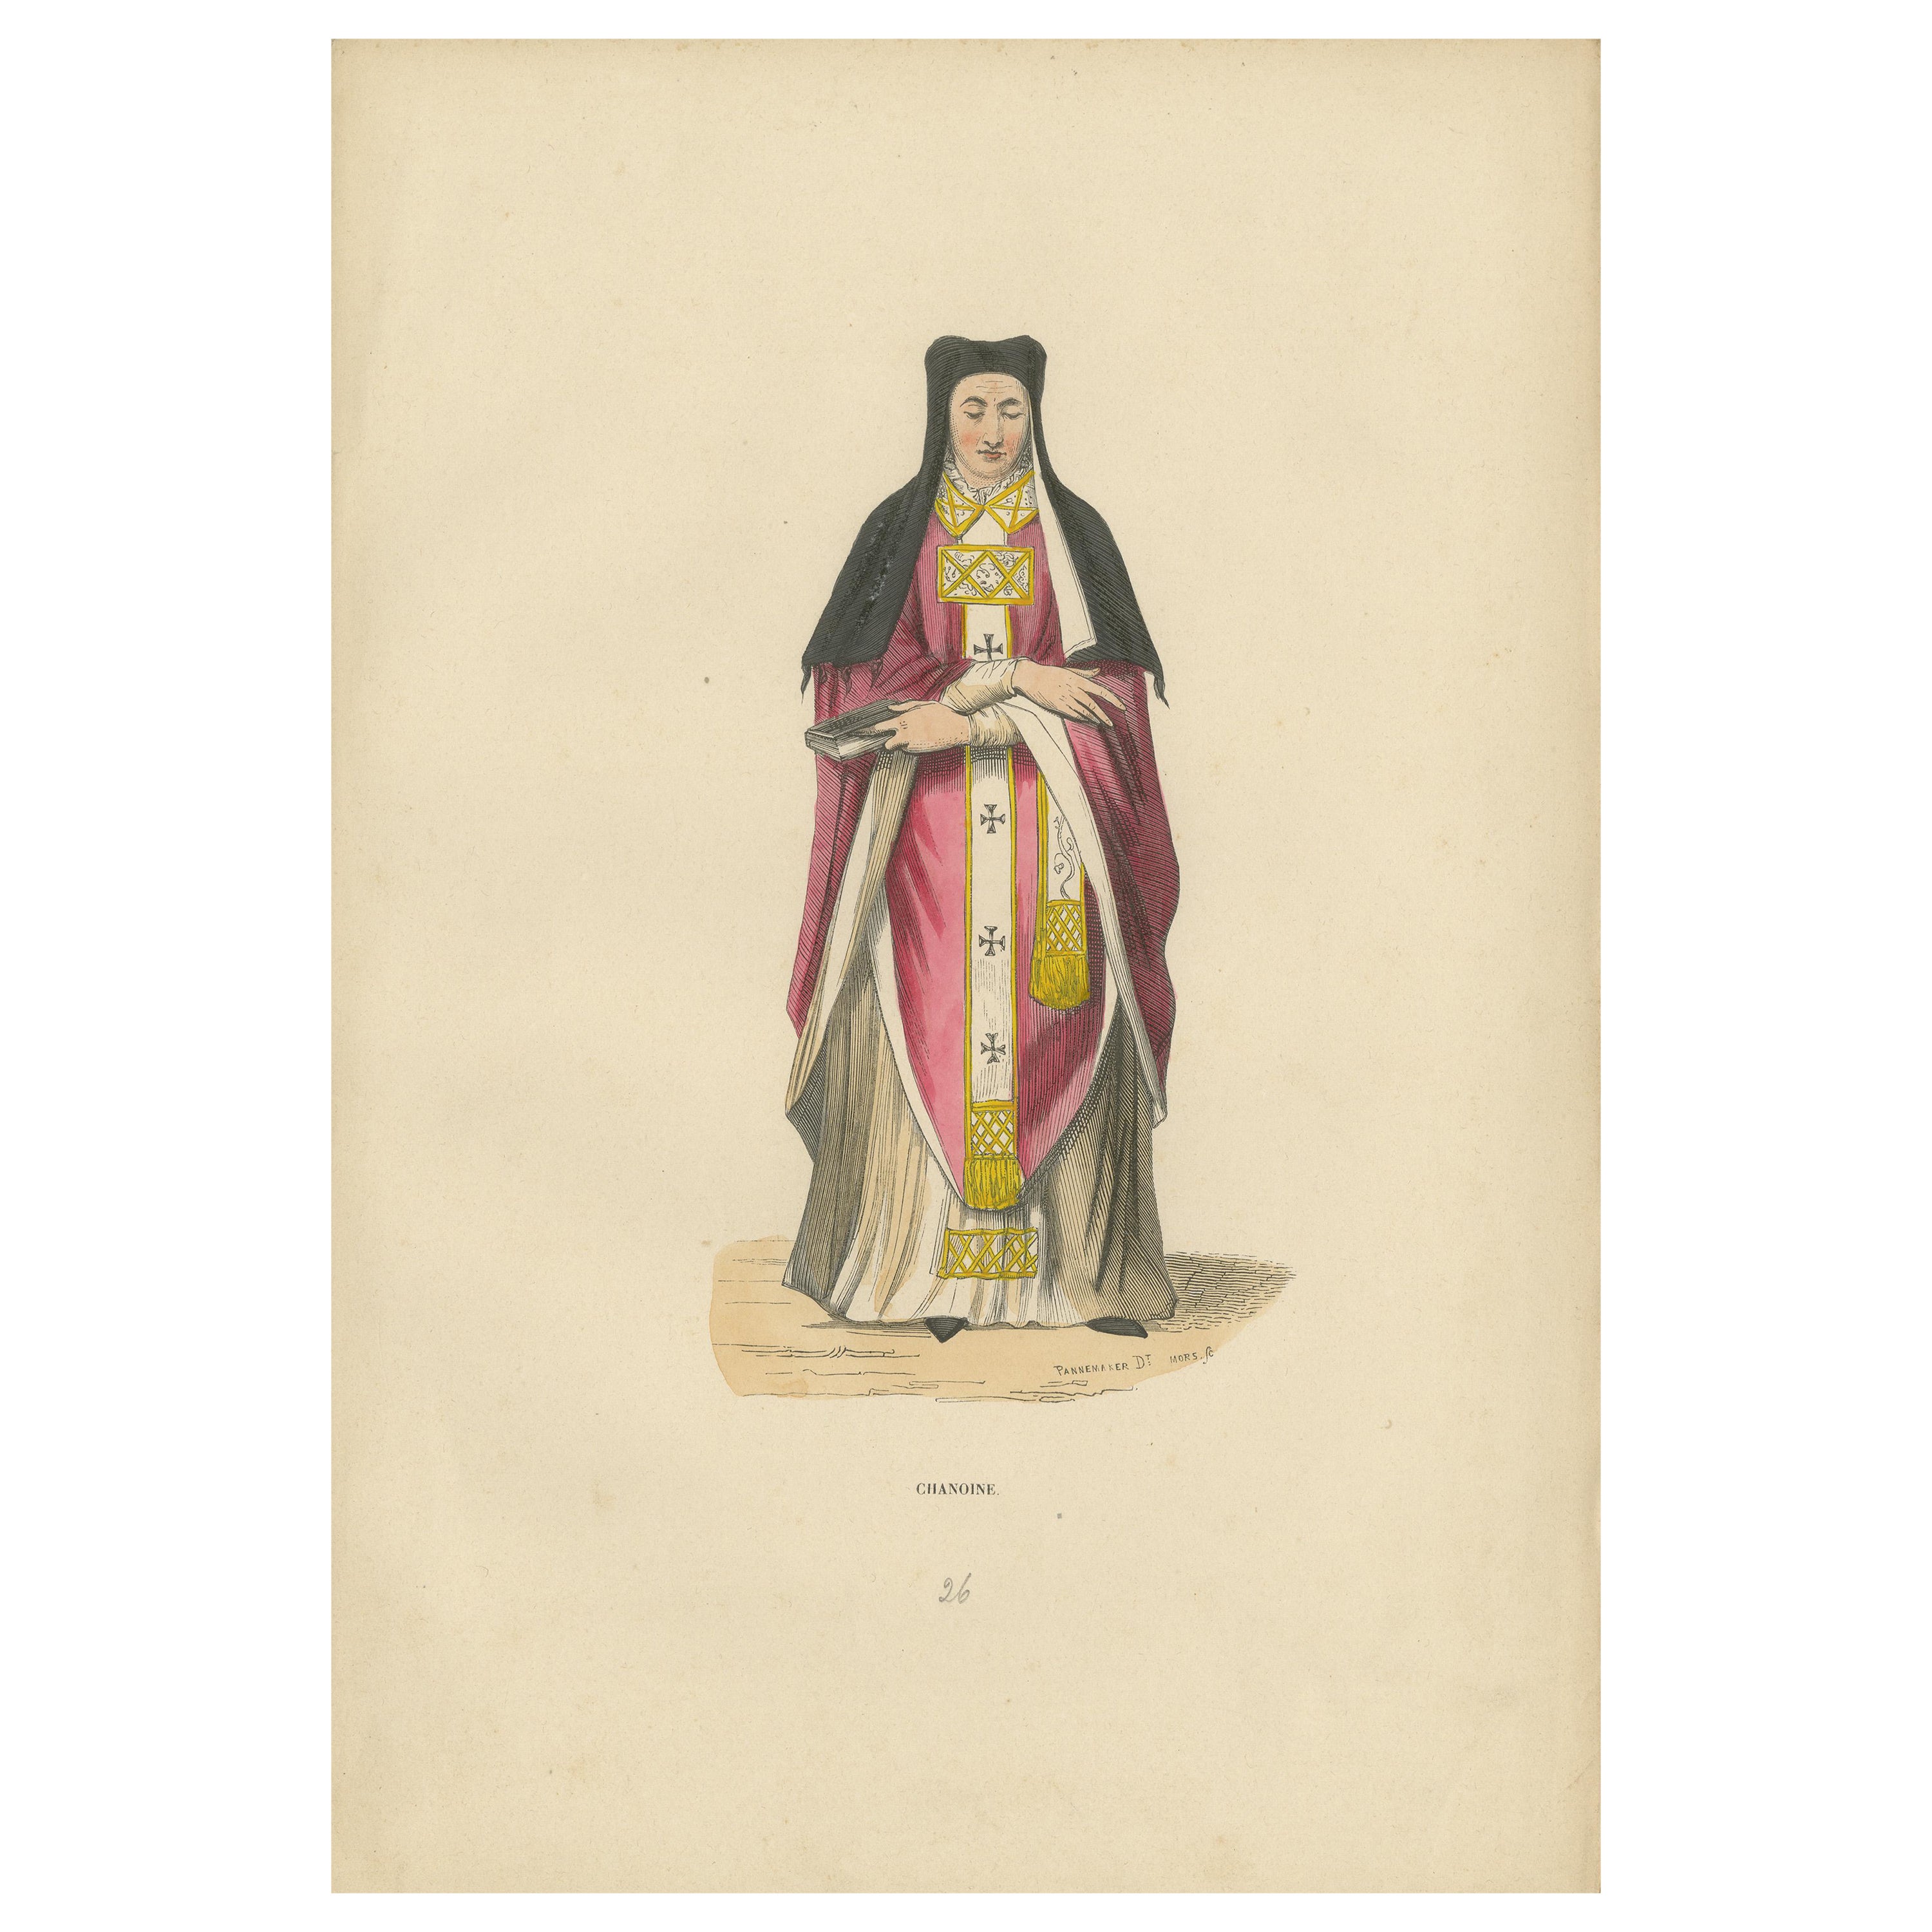 In Solemn Duty: A Canon in Contemplation, handkolorierte Lithographie, 1847 im Angebot